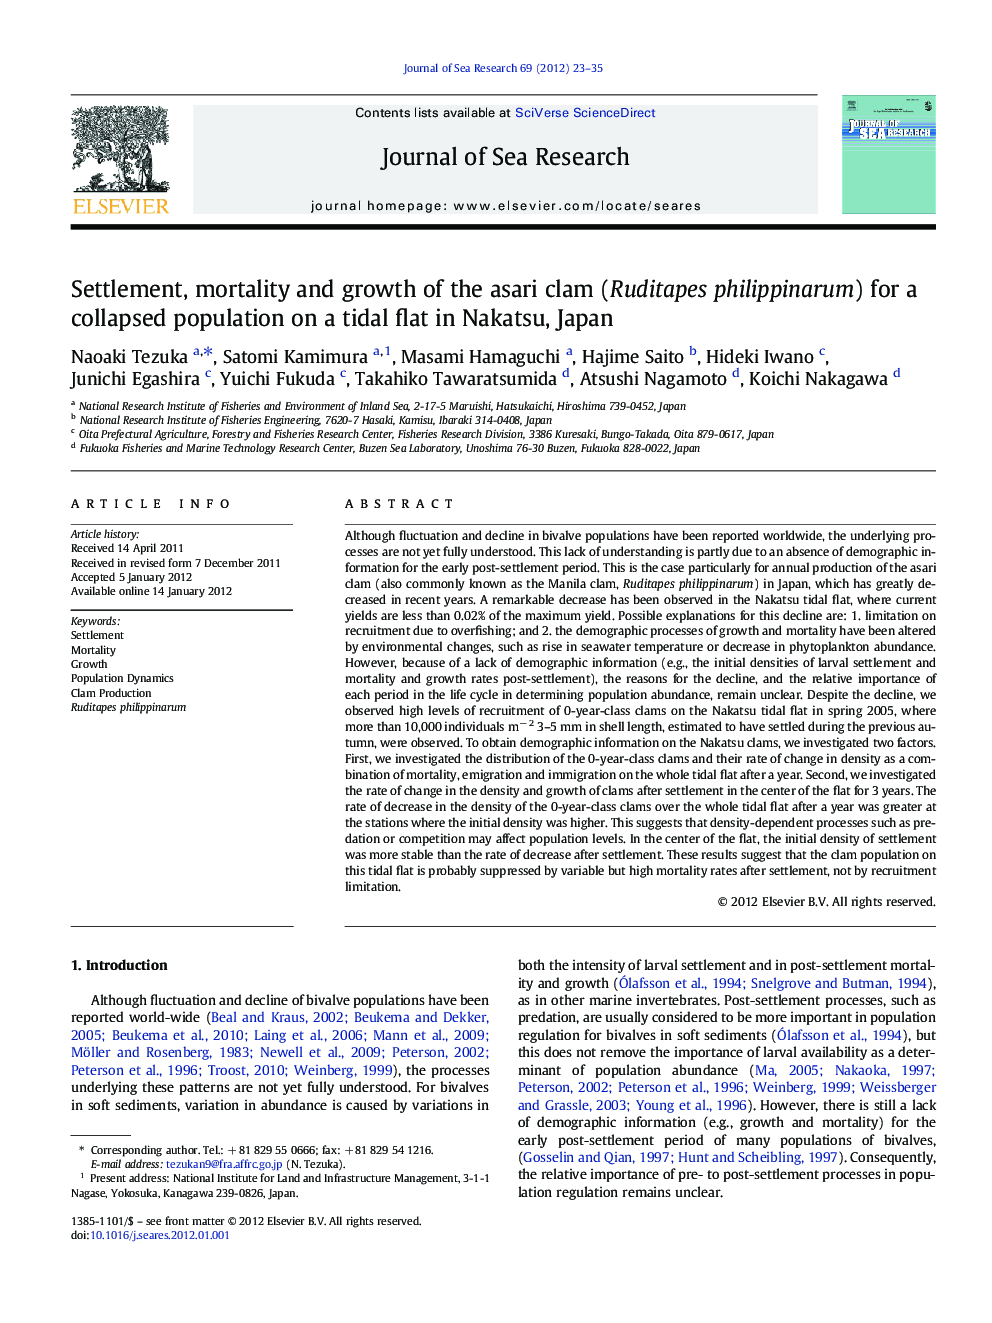 Settlement, mortality and growth of the asari clam (Ruditapes philippinarum) for a collapsed population on a tidal flat in Nakatsu, Japan